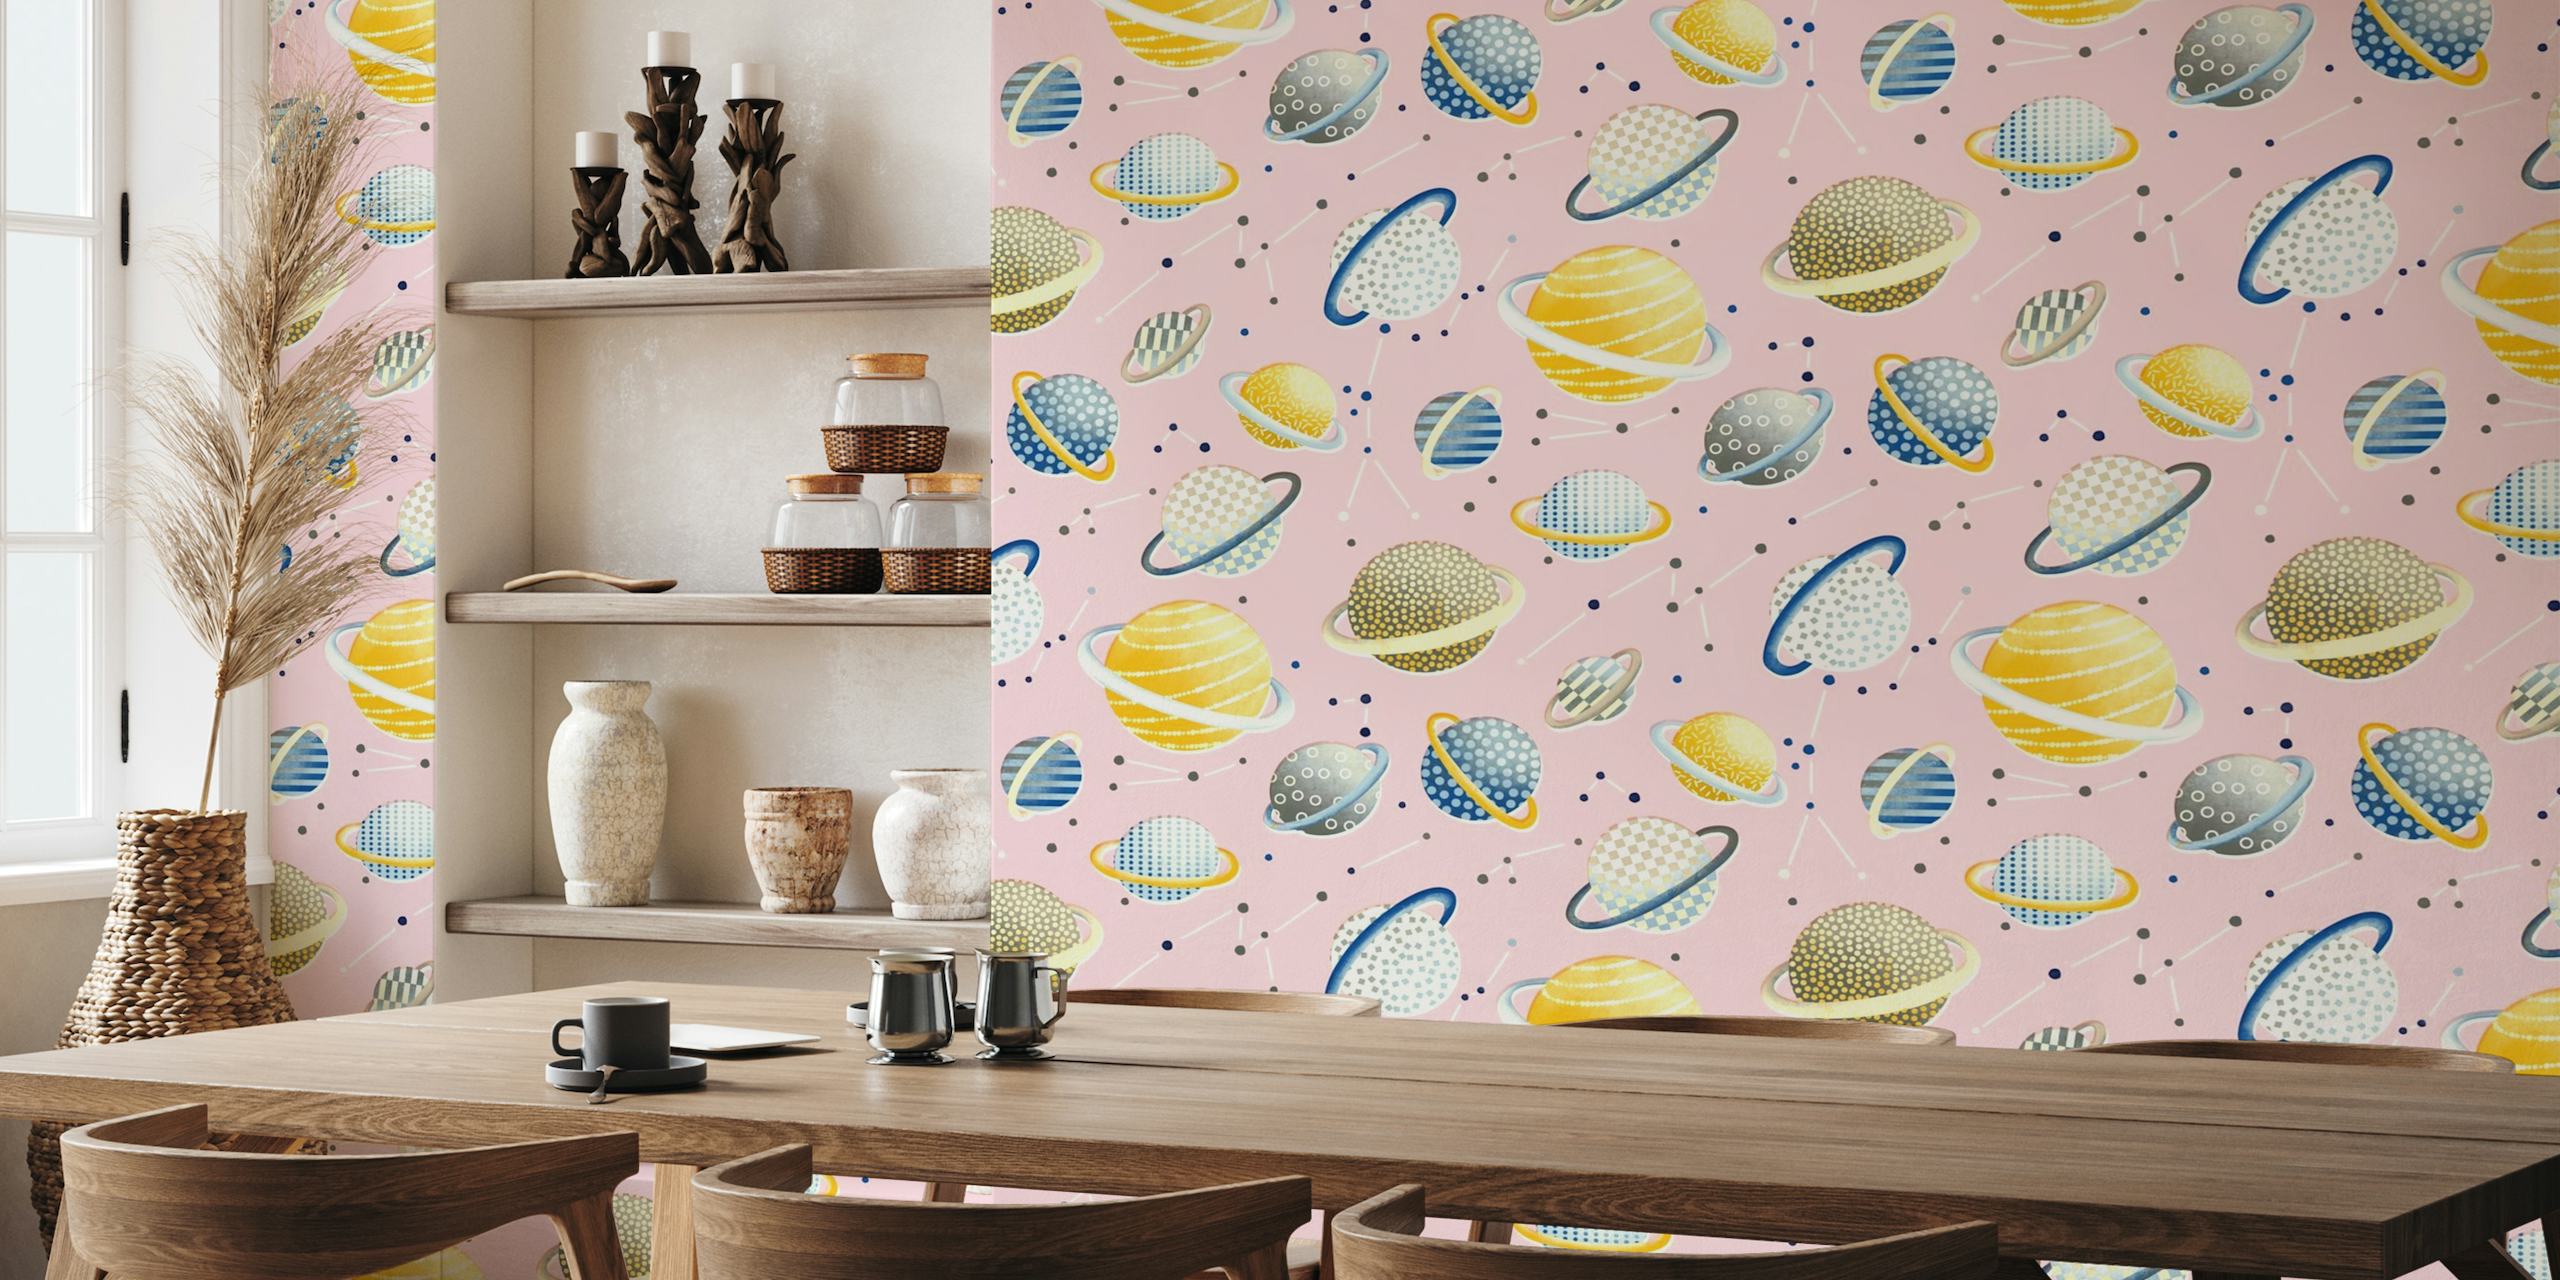 Celestial view of planets and constellations papel pintado